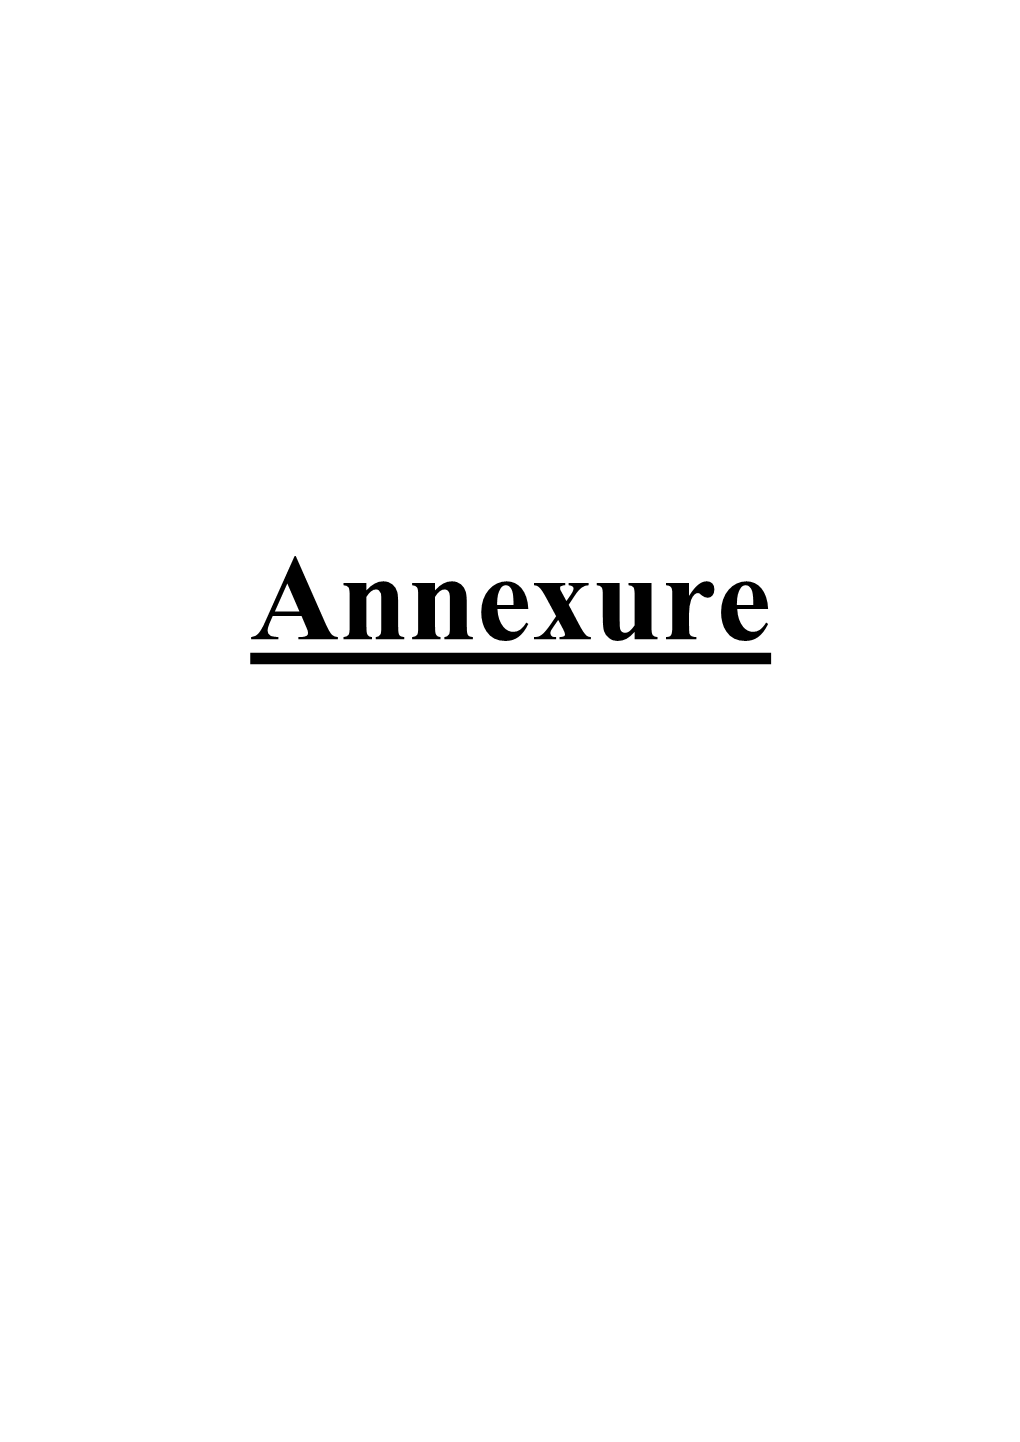 ANNEXURE 1 in Response to Point # 3 of 50-Point Questionnaire